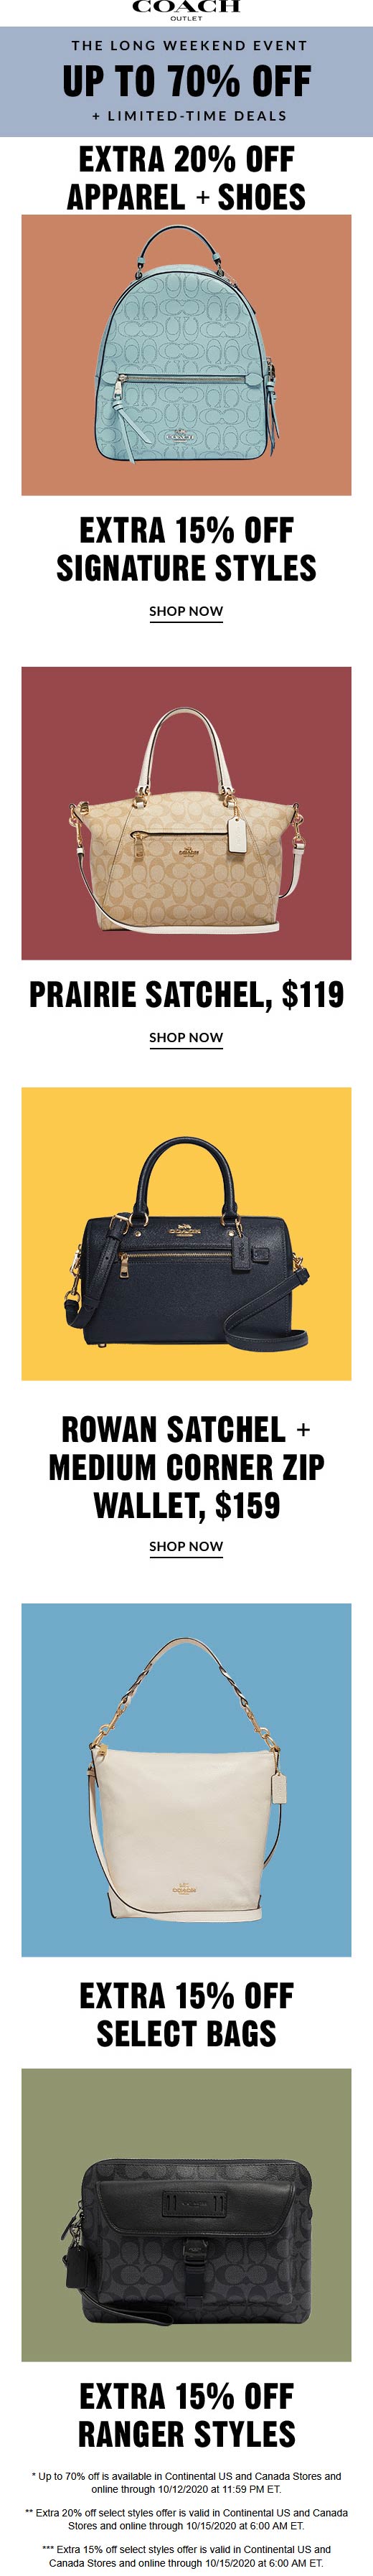 Coach Outlet stores Coupon  Extra 20% off apparel shoes & more at Coach Outlet #coachoutlet 